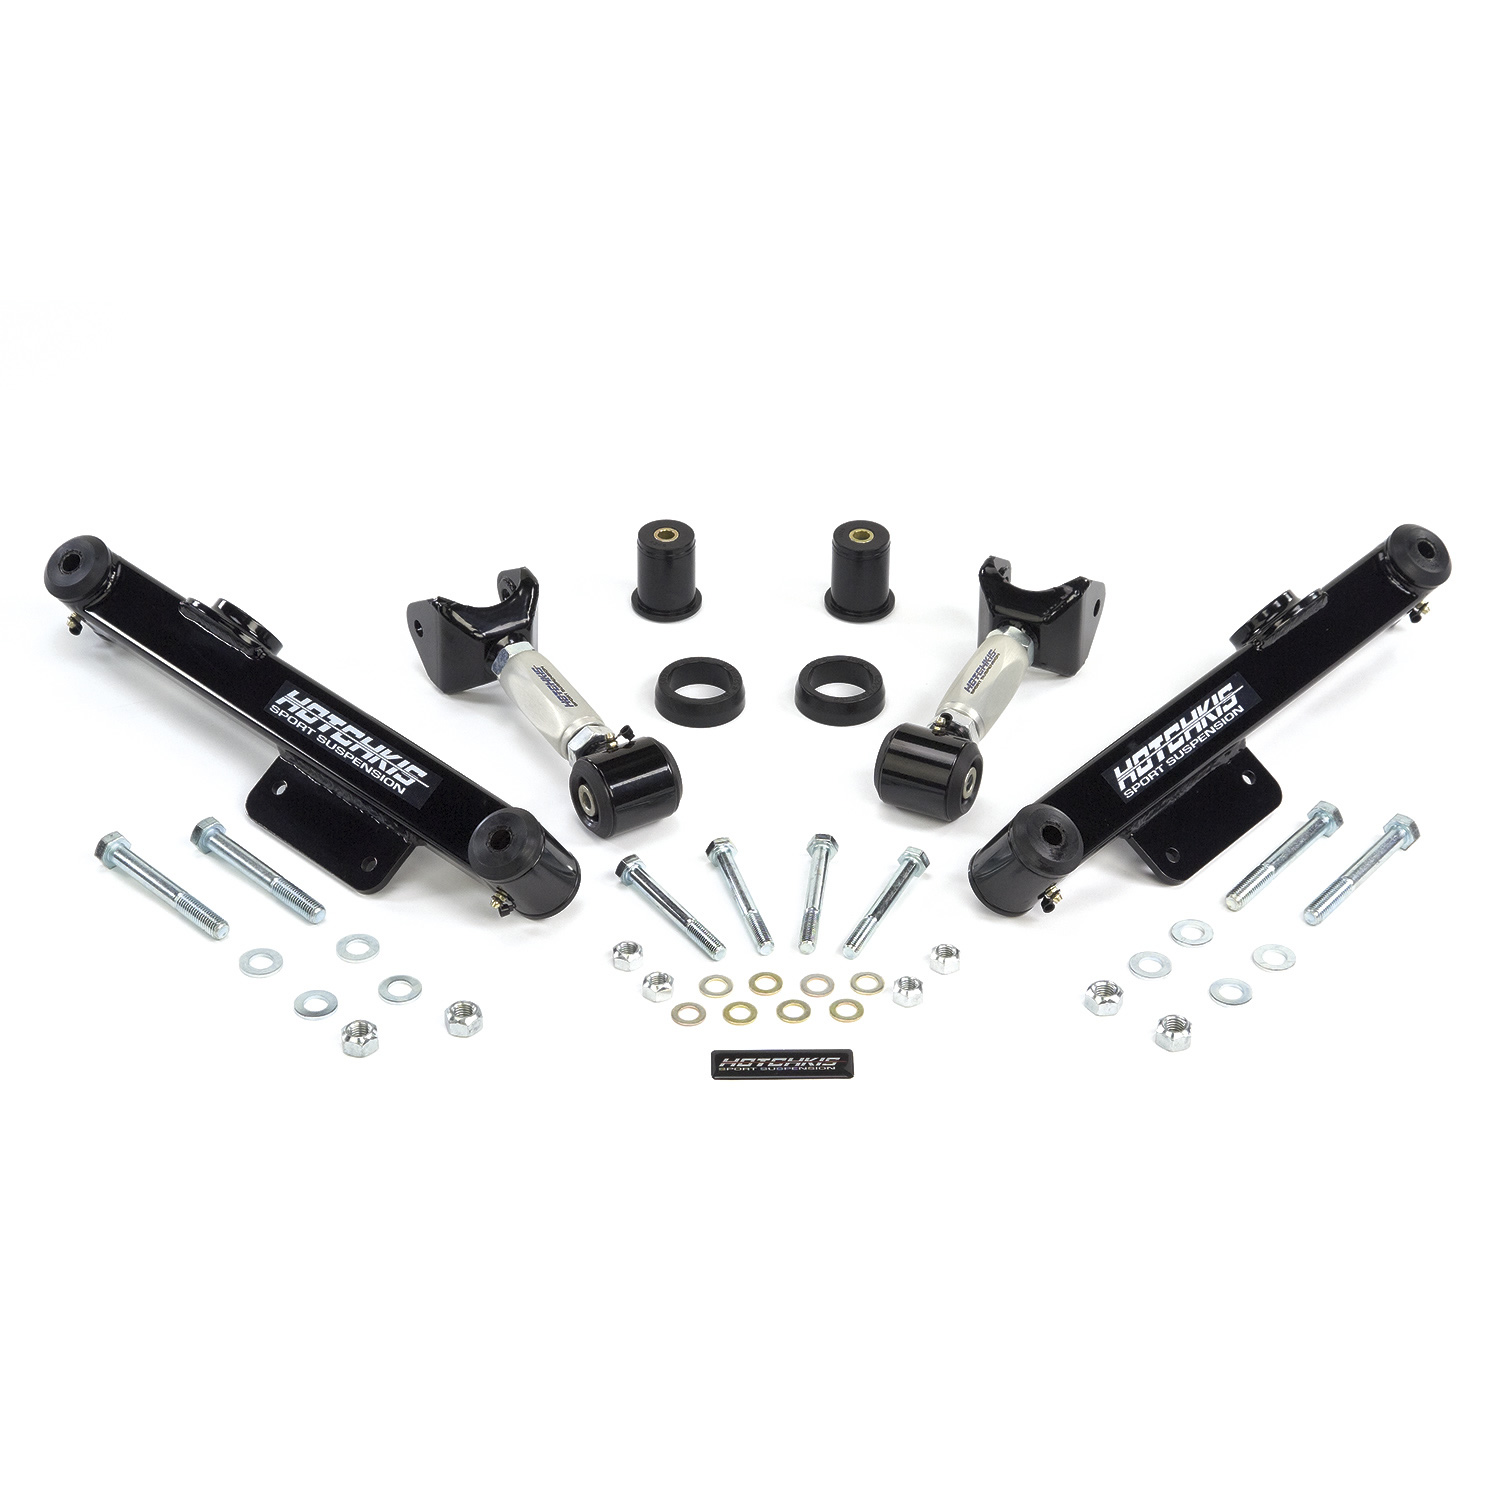 1999-2004 Ford Mustang Hotchkis Rear Adjustable Suspension Package